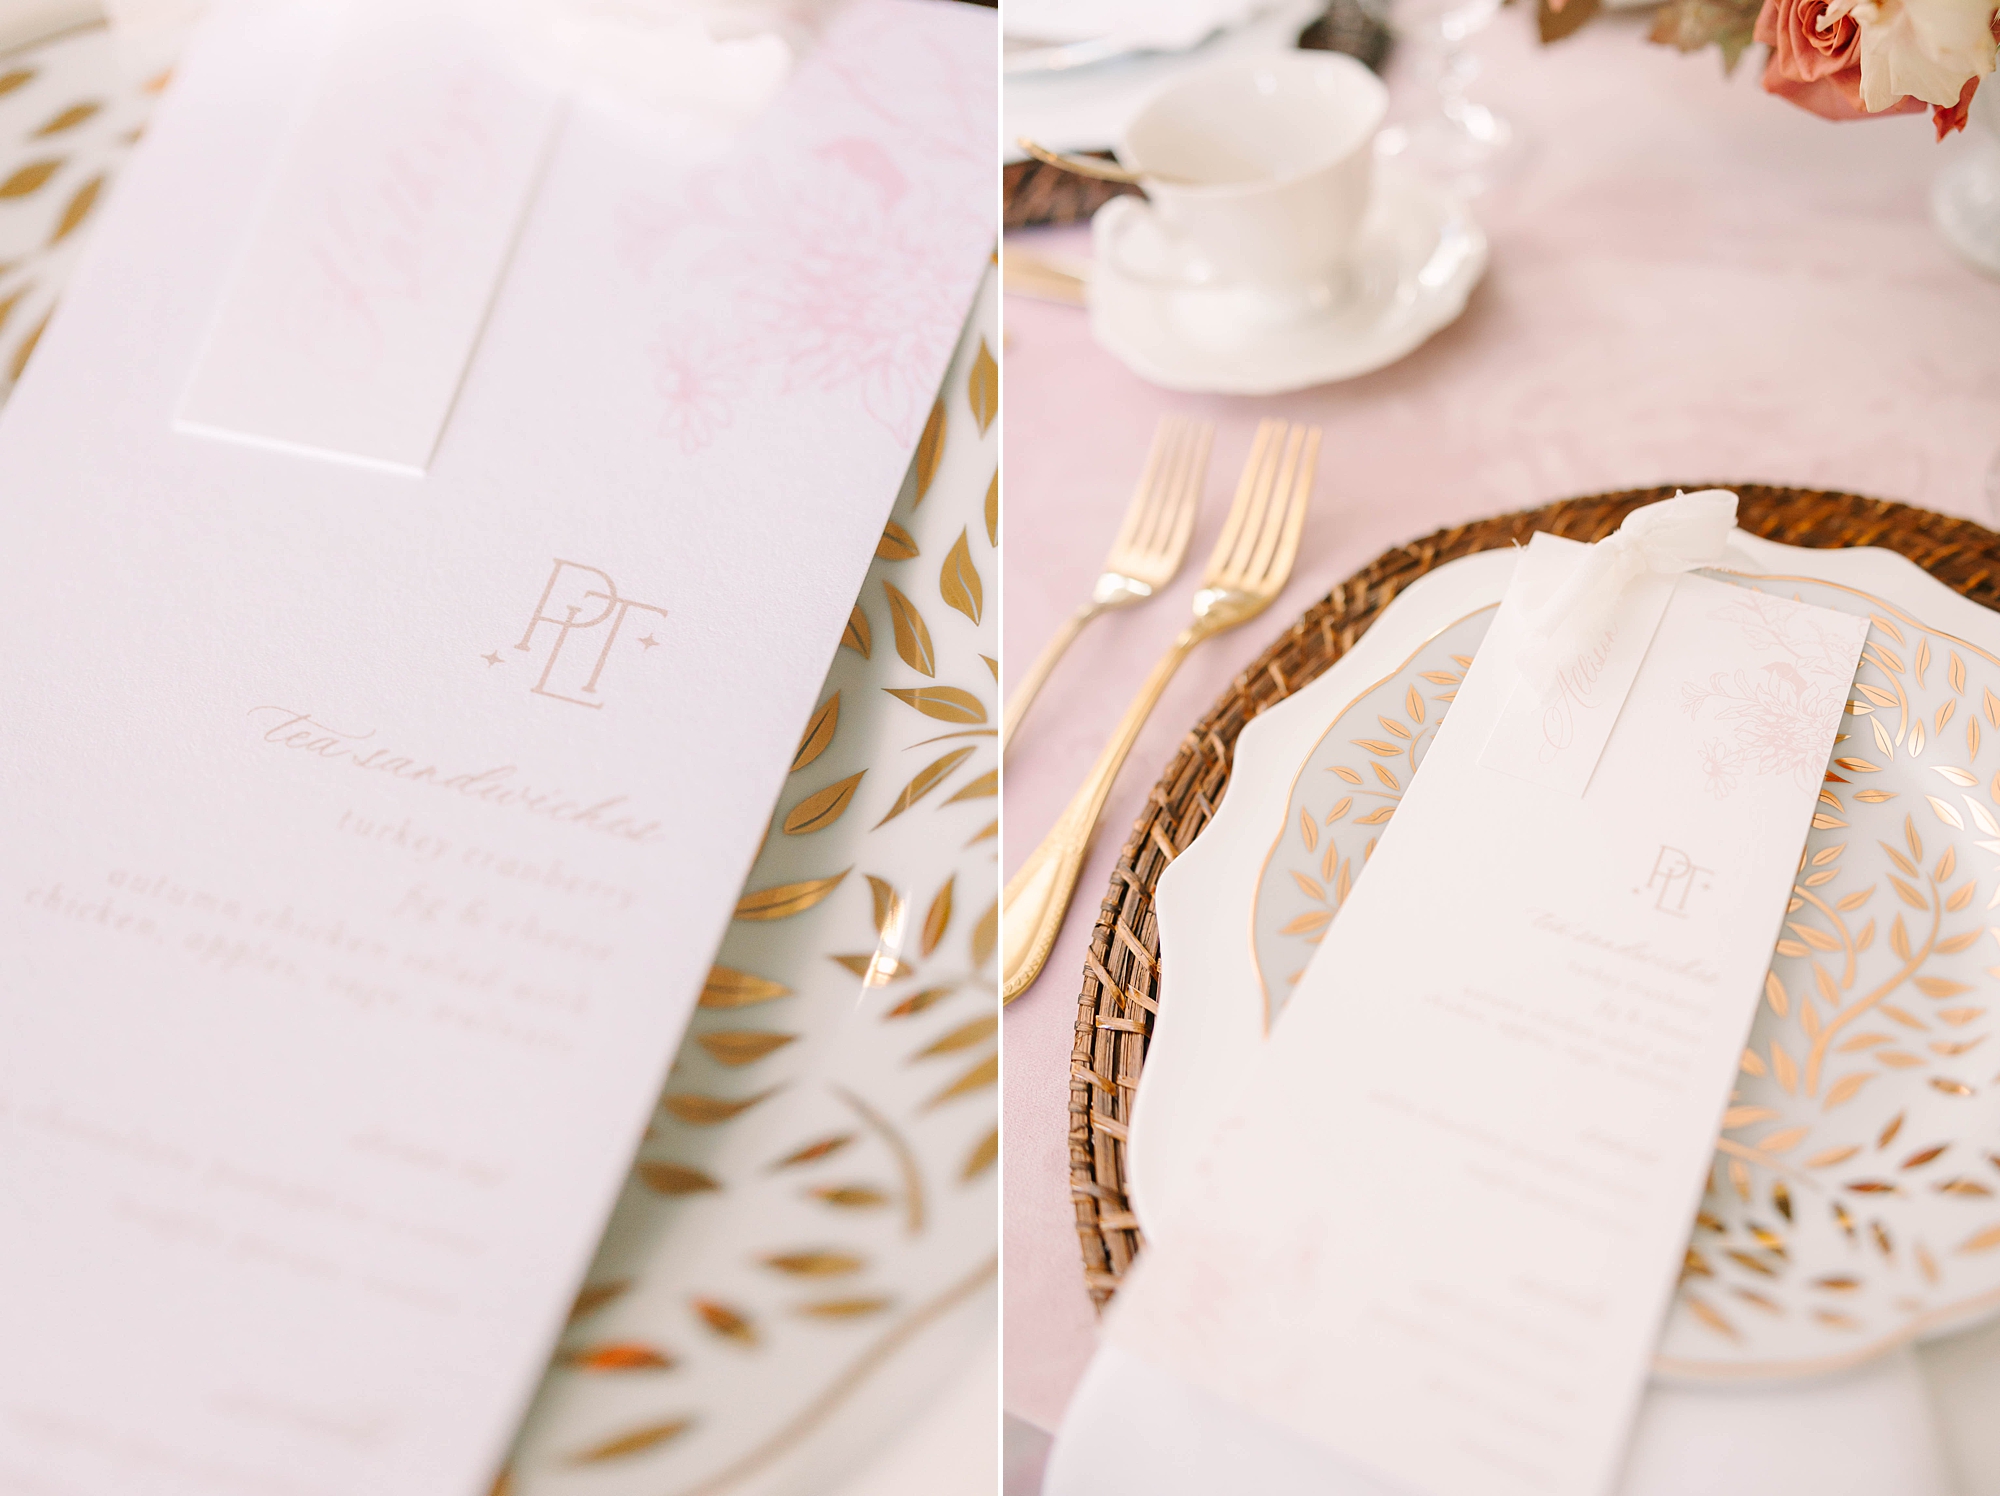 pink, white, and burgundy place setting details for fall and Thanksgiving inspired tea by Pretty Lovely Teas